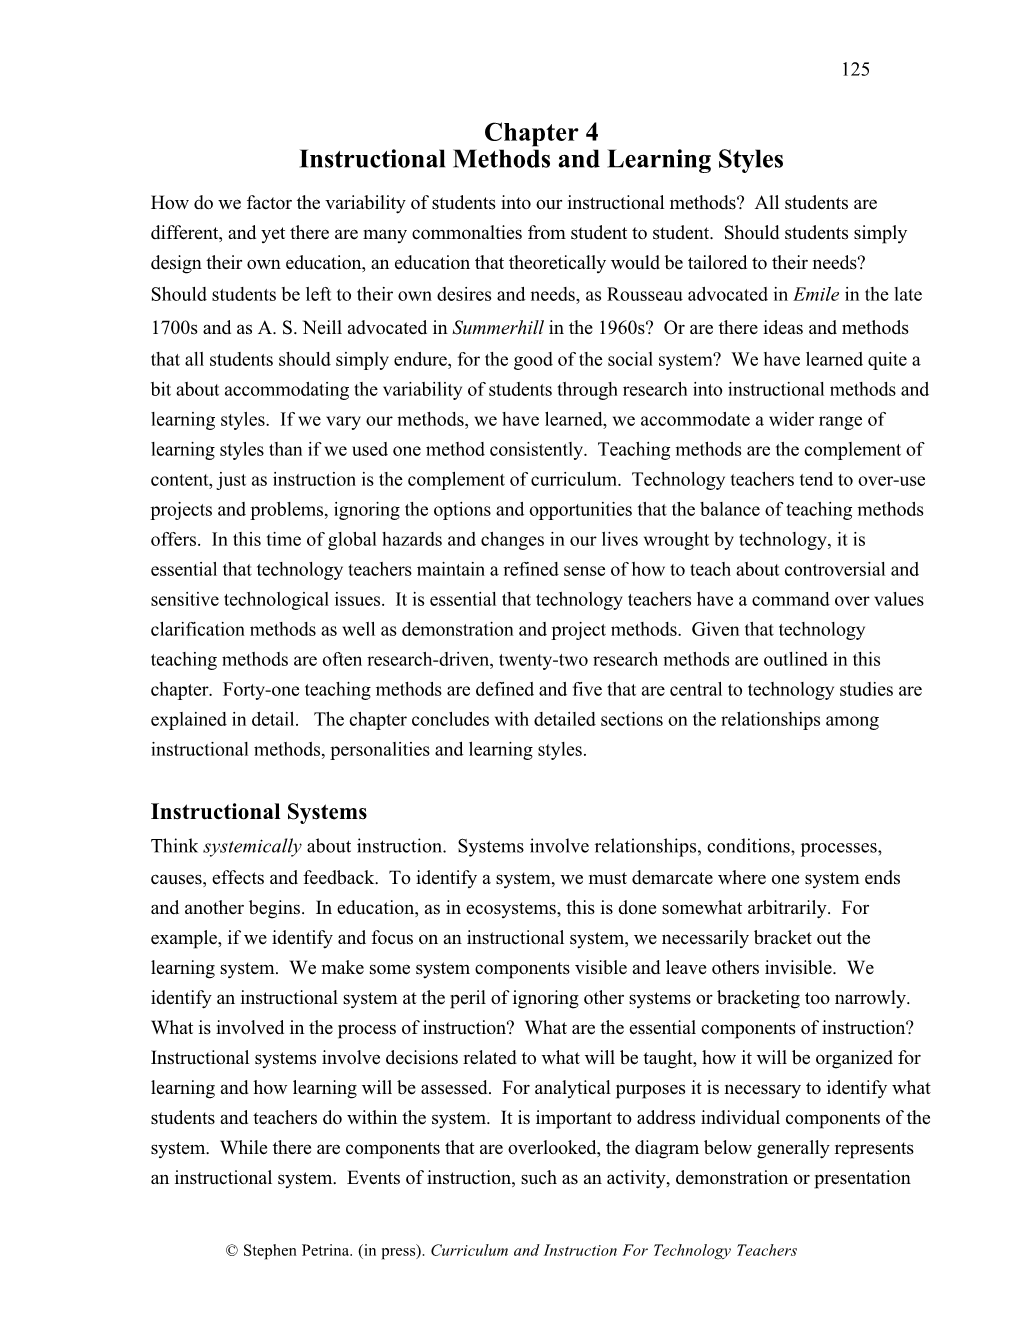 Chapter 4 Instructional Methods and Learning Styles